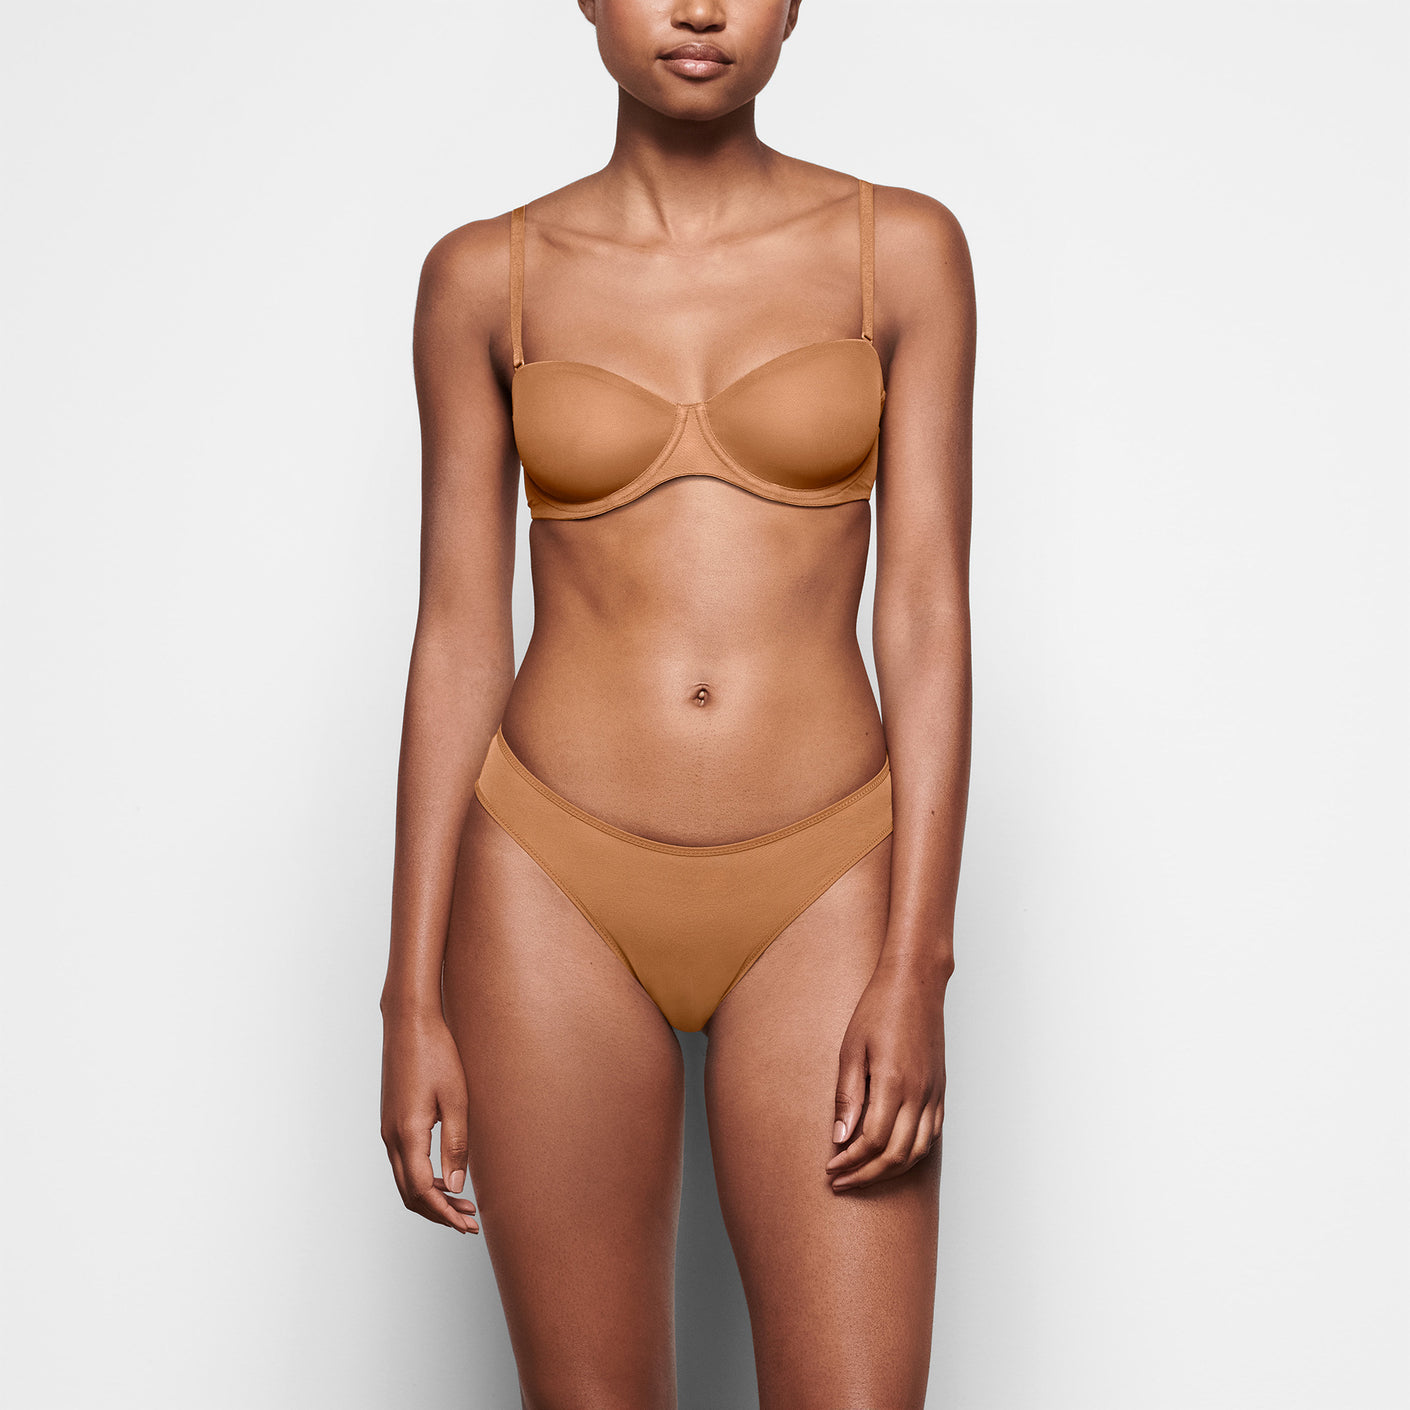 SKIMS Strapless Bra NWT 34A Tan Size 34 A - $30 (44% Off Retail) New With  Tags - From Ali